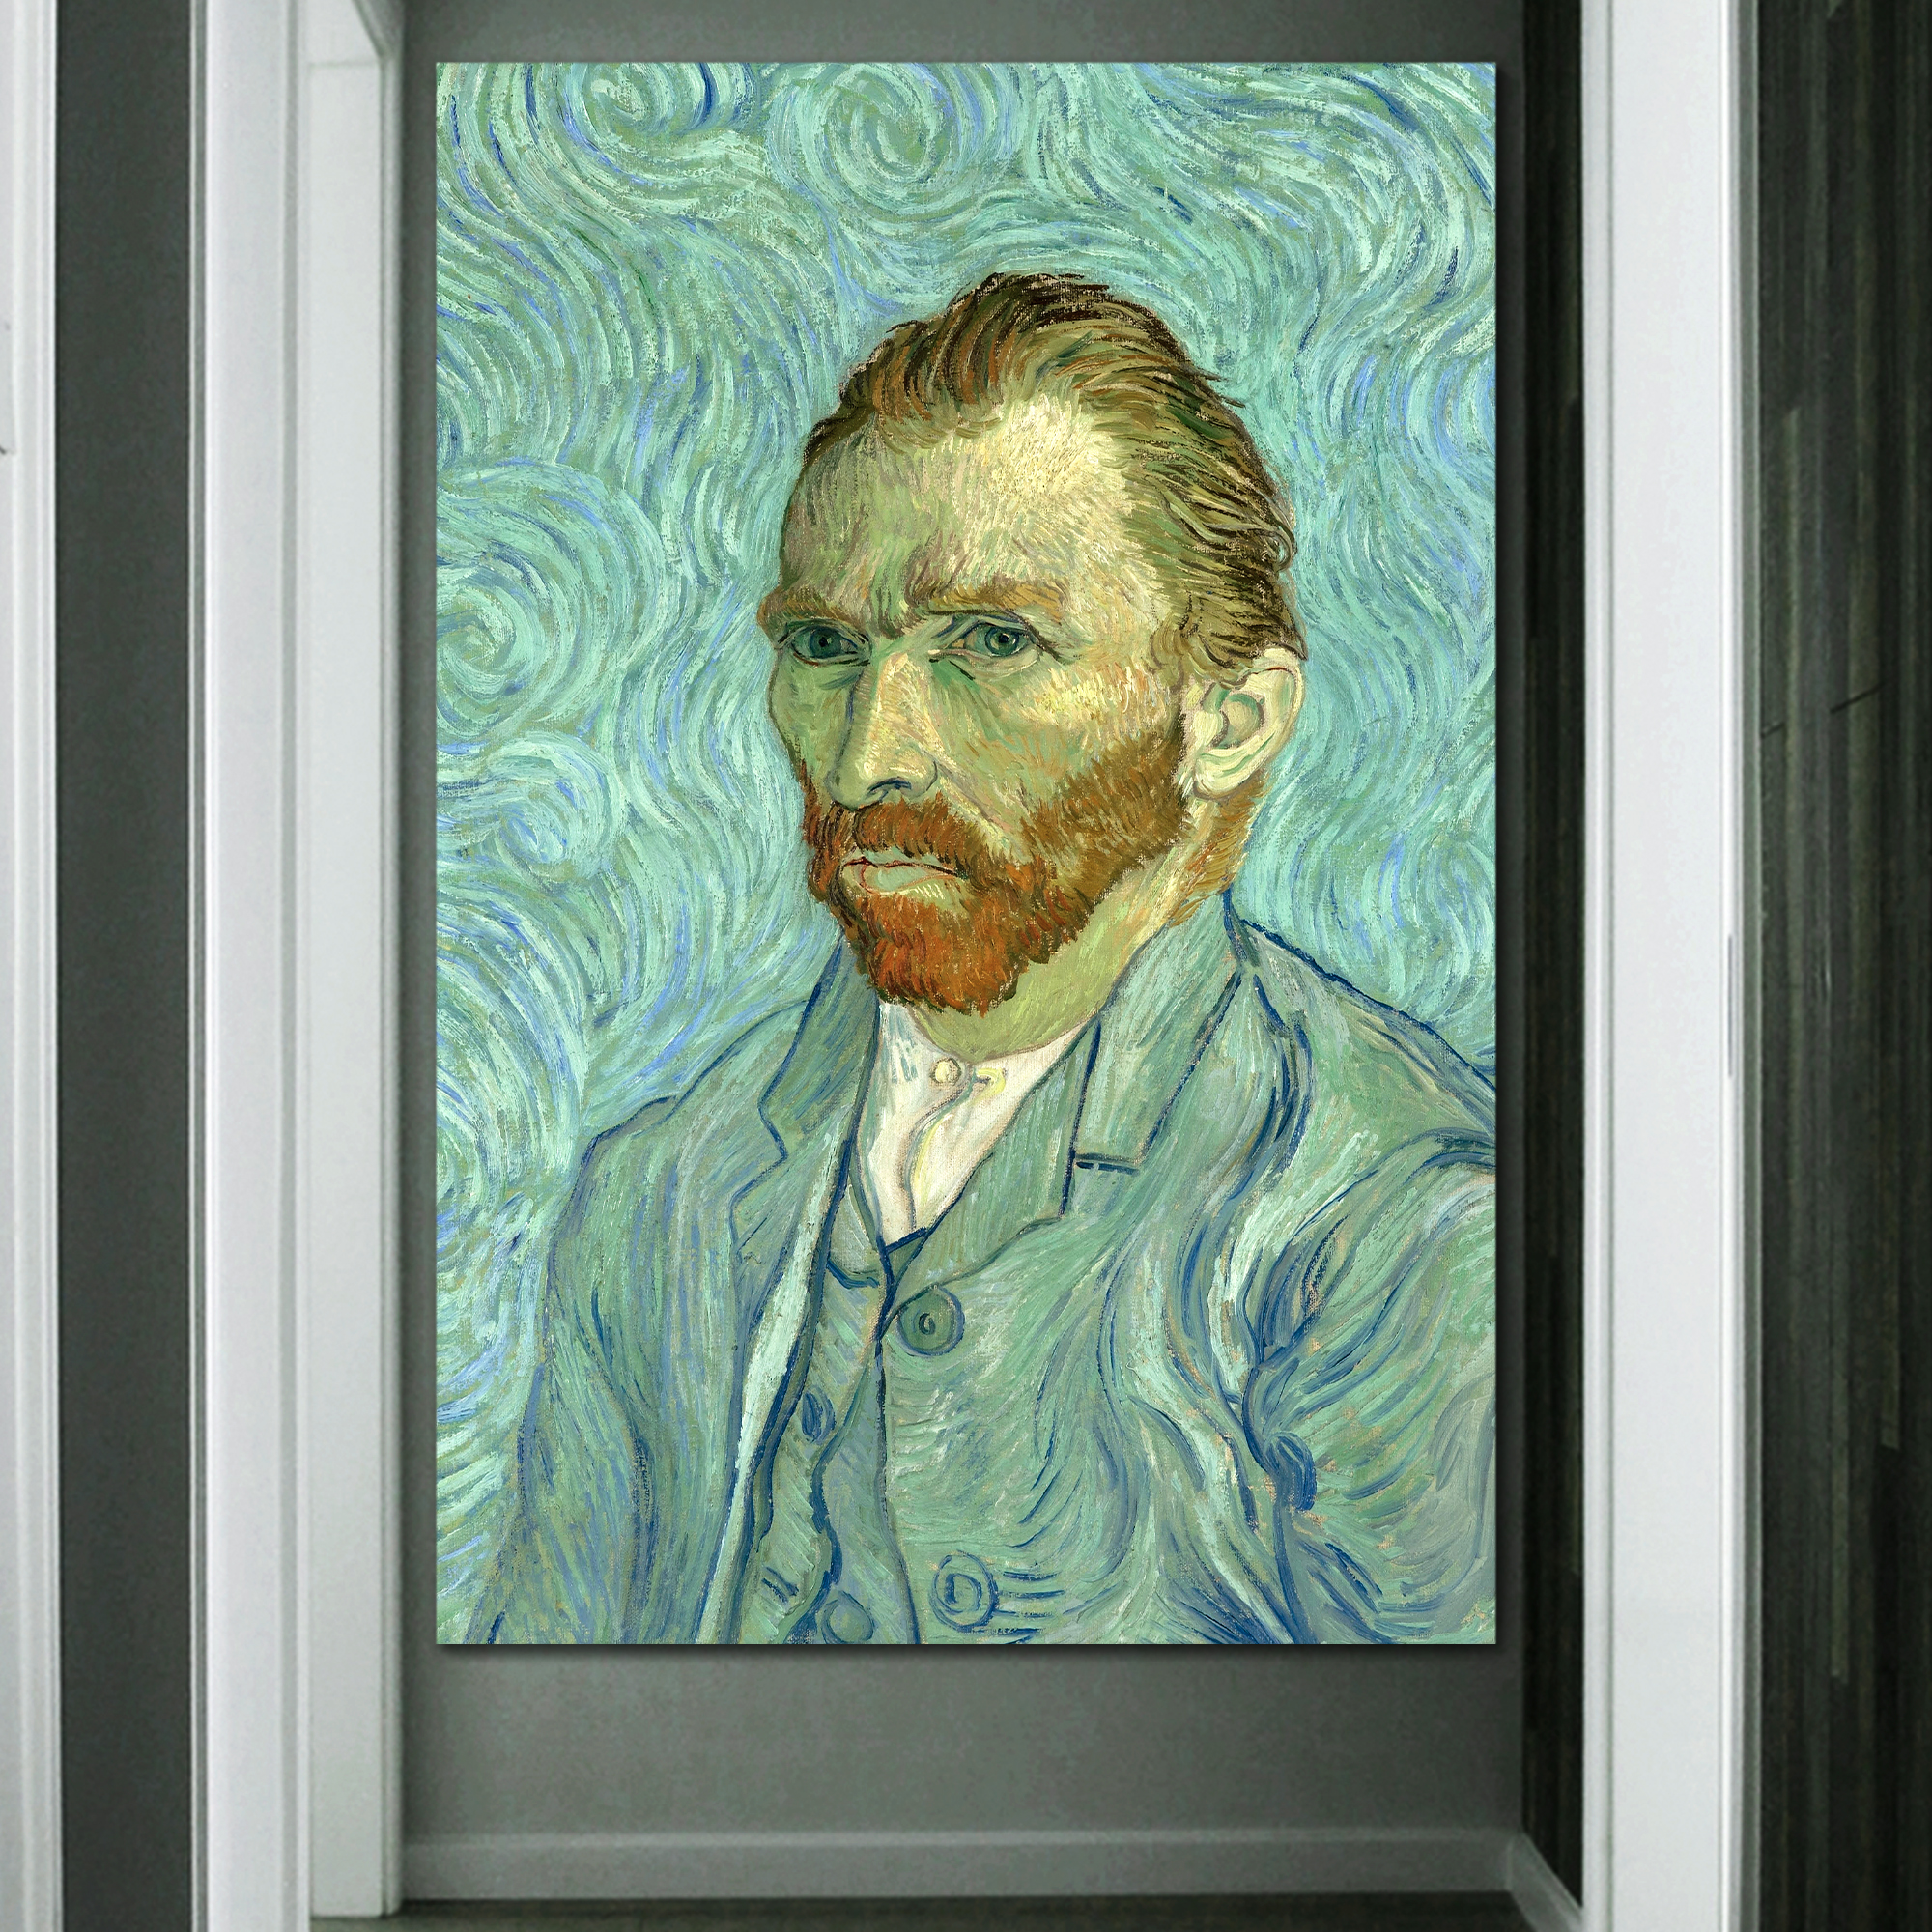 Portrait of Vincent Van Gogh - Inspirational Famous People Series | Giclee Print Canvas Wall Art. Ready to Hang - 24